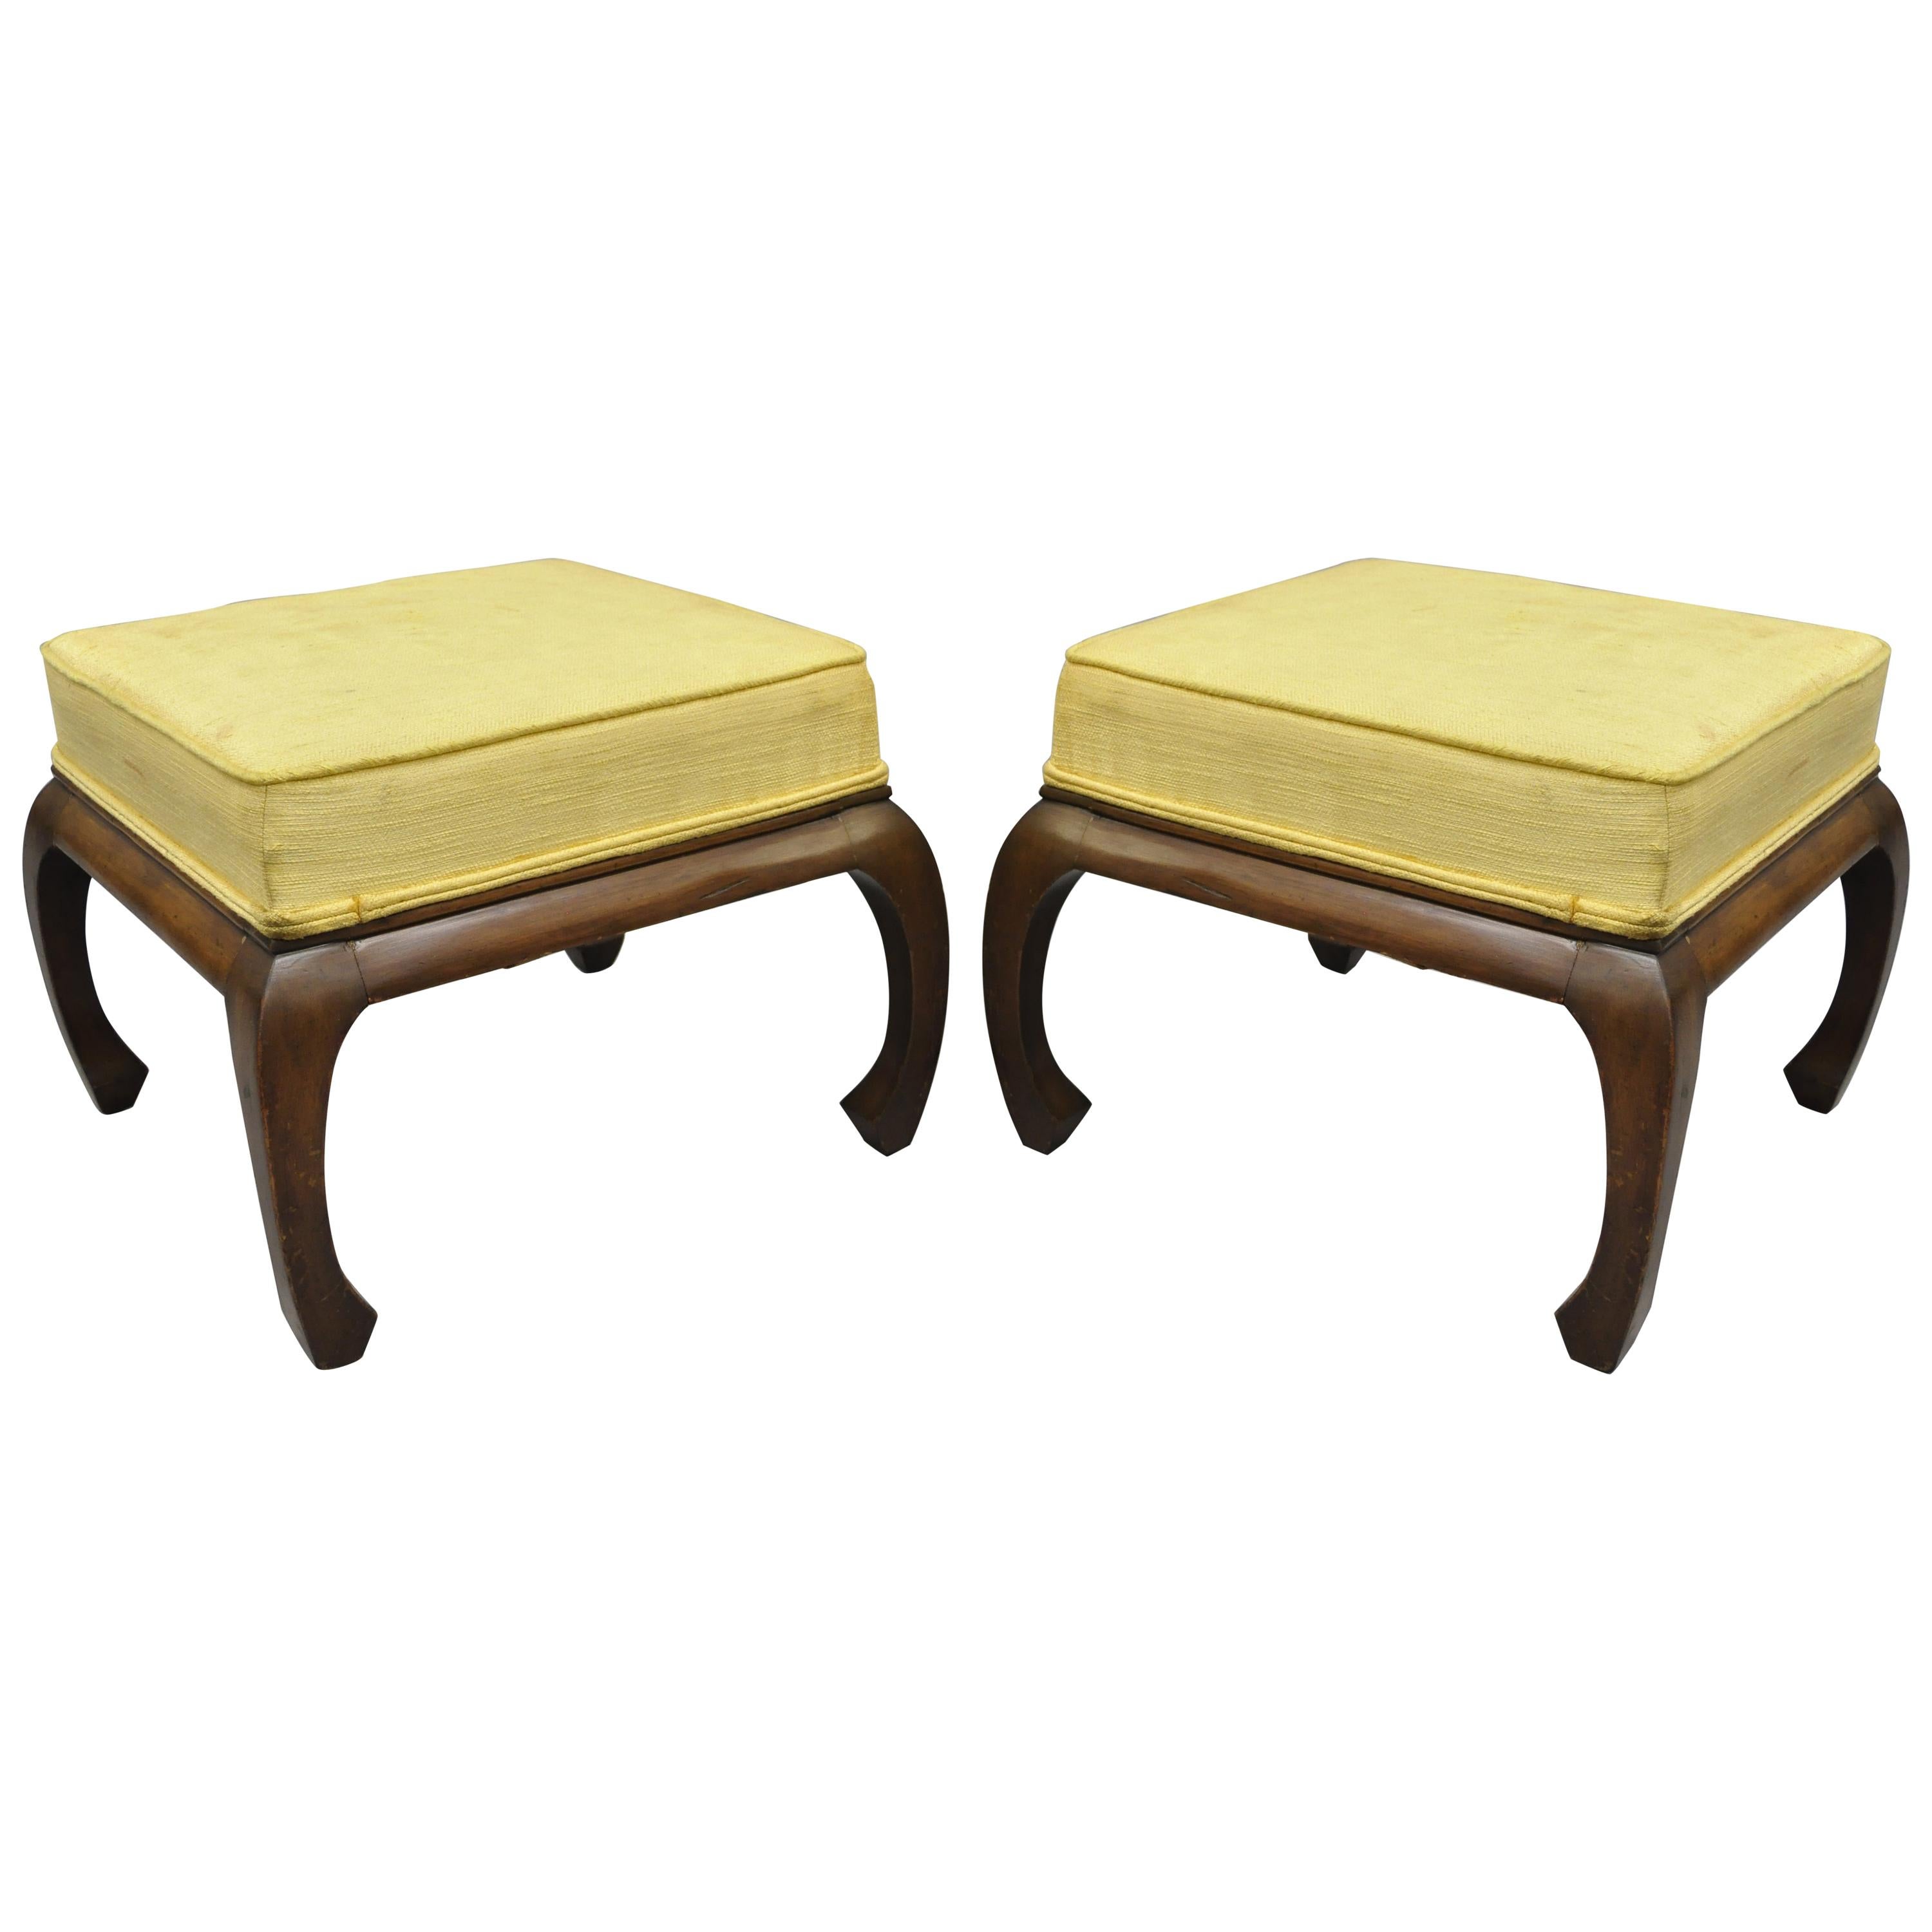 Pair of Vintage Chinoiserie Ming Style Box Seat Upholstered Ottoman Stools